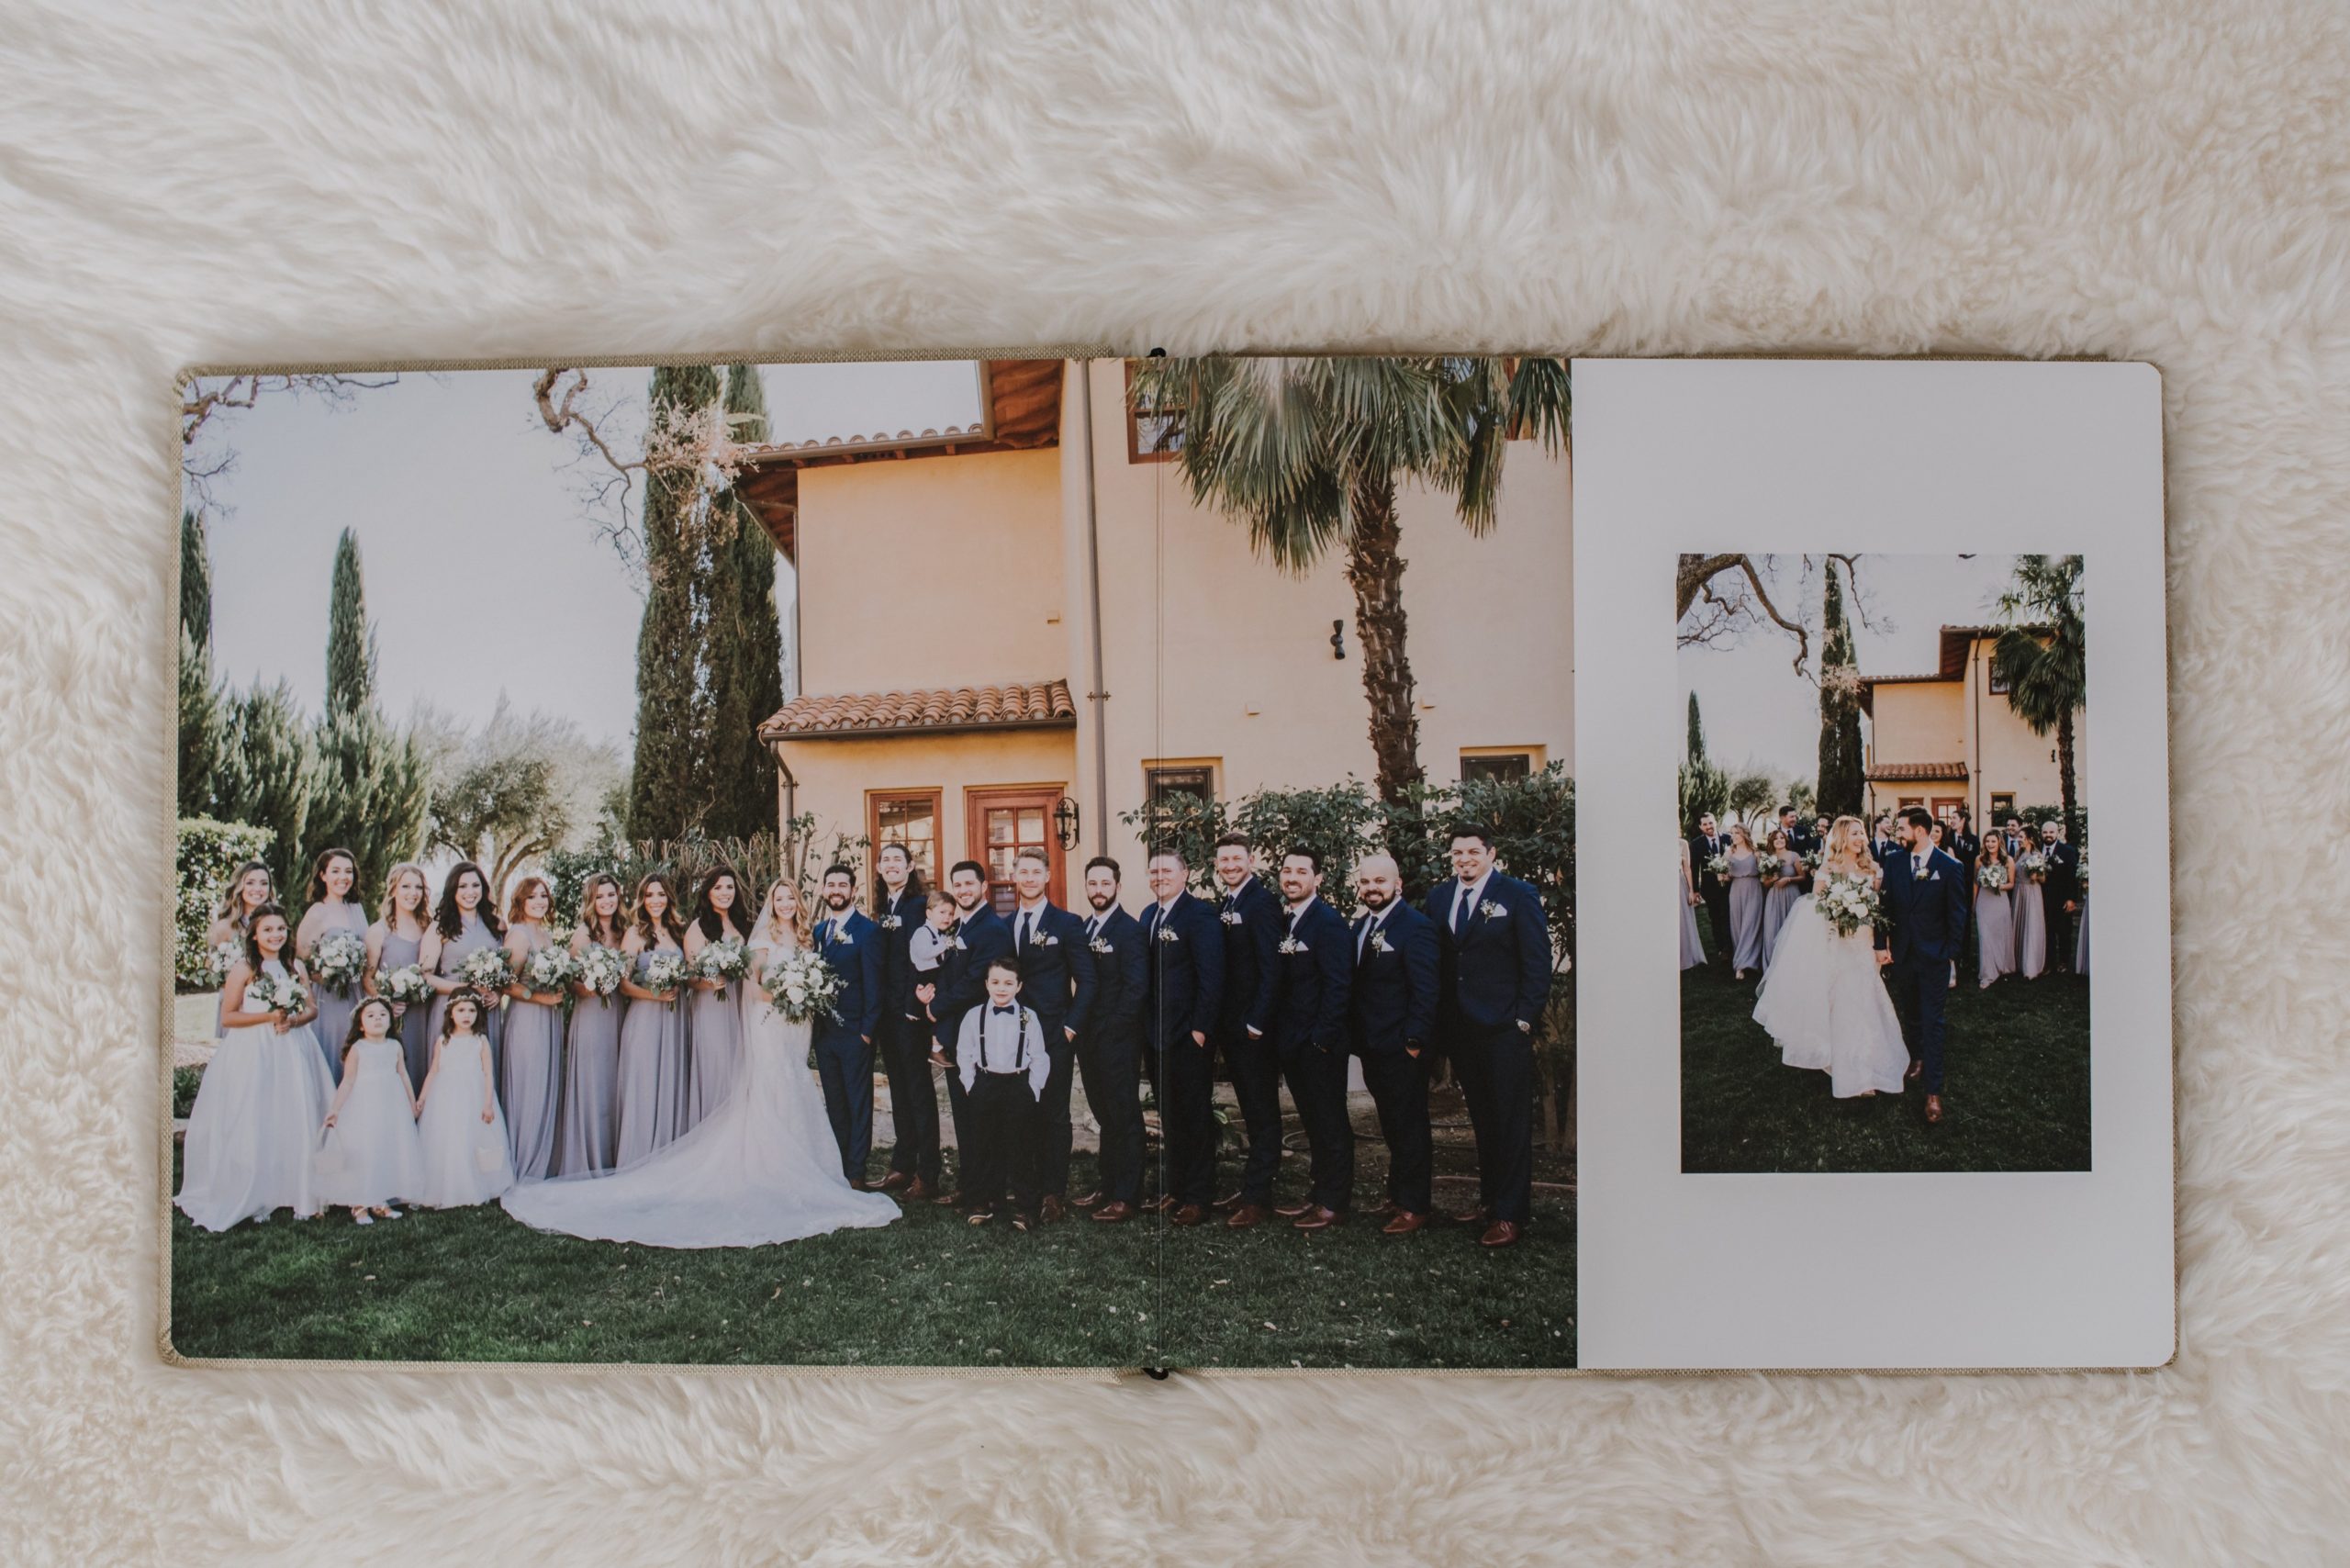 Why should I invest in a wedding album and wall art? Nikkels Photography